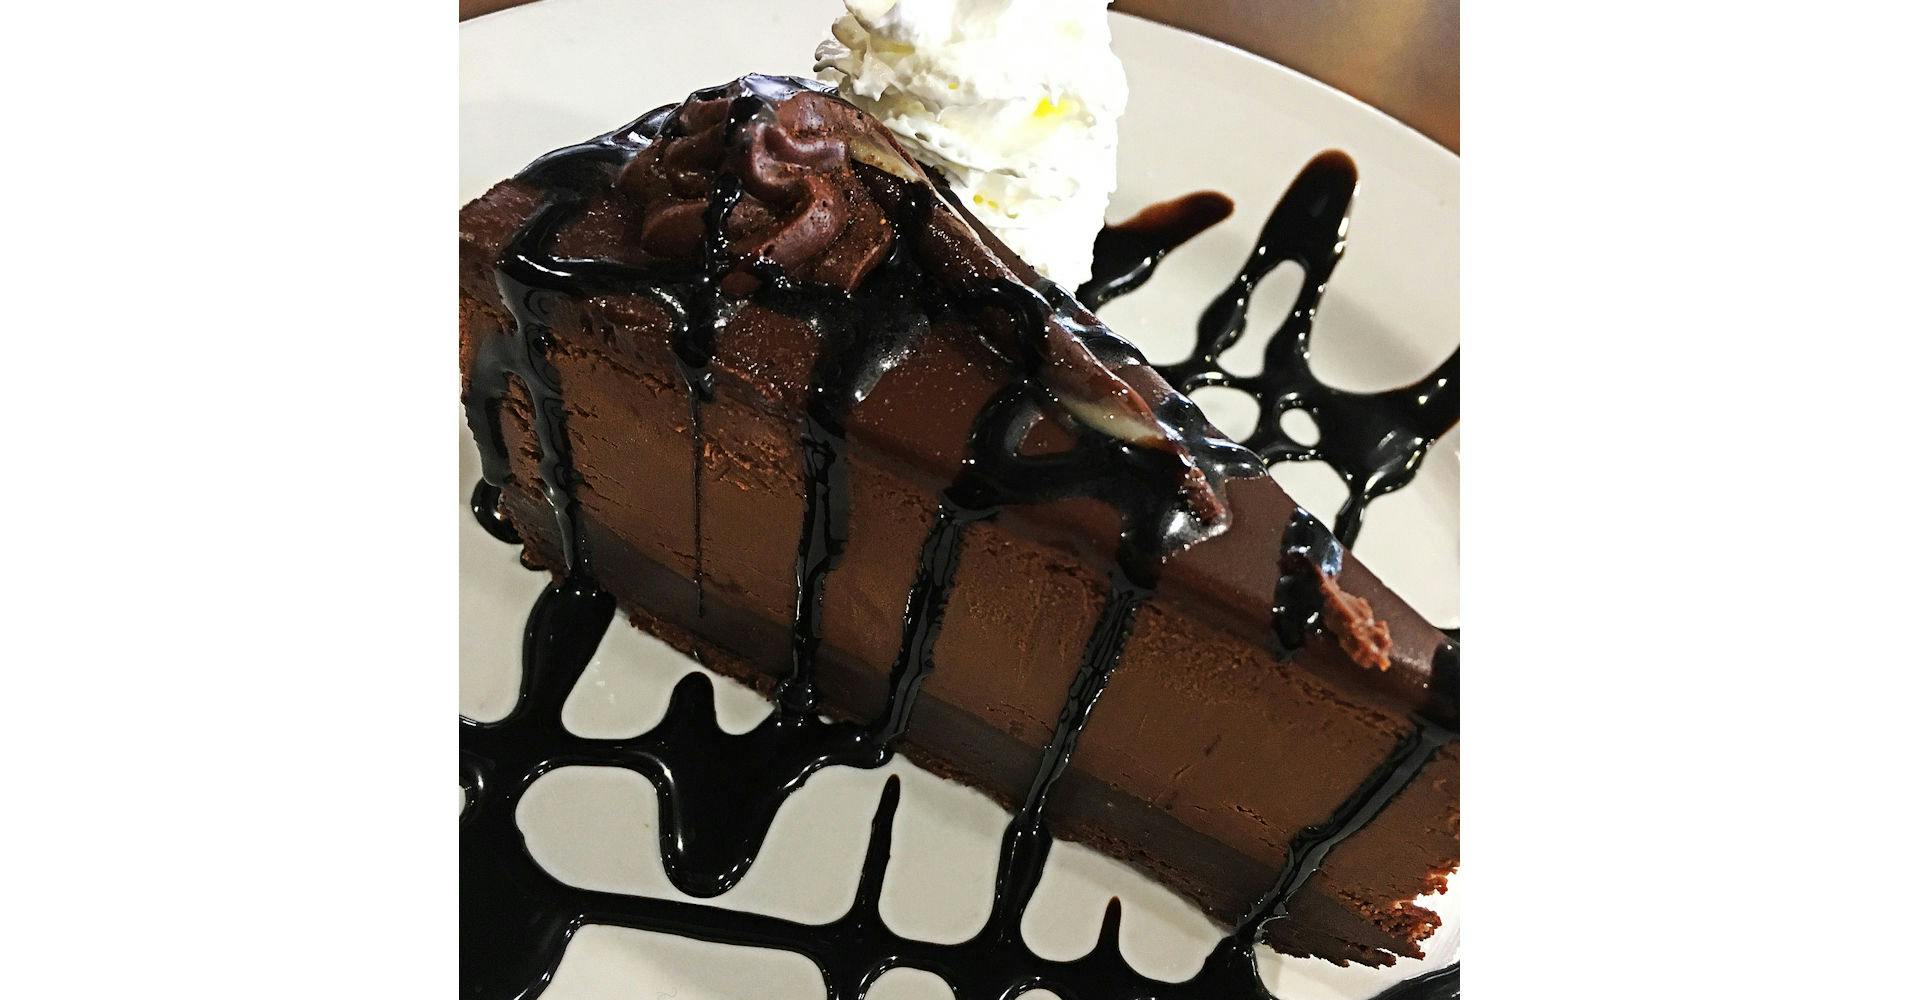 Chocolate Cake from Silly Serrano Mexican Restaurant in Eau Claire, WI